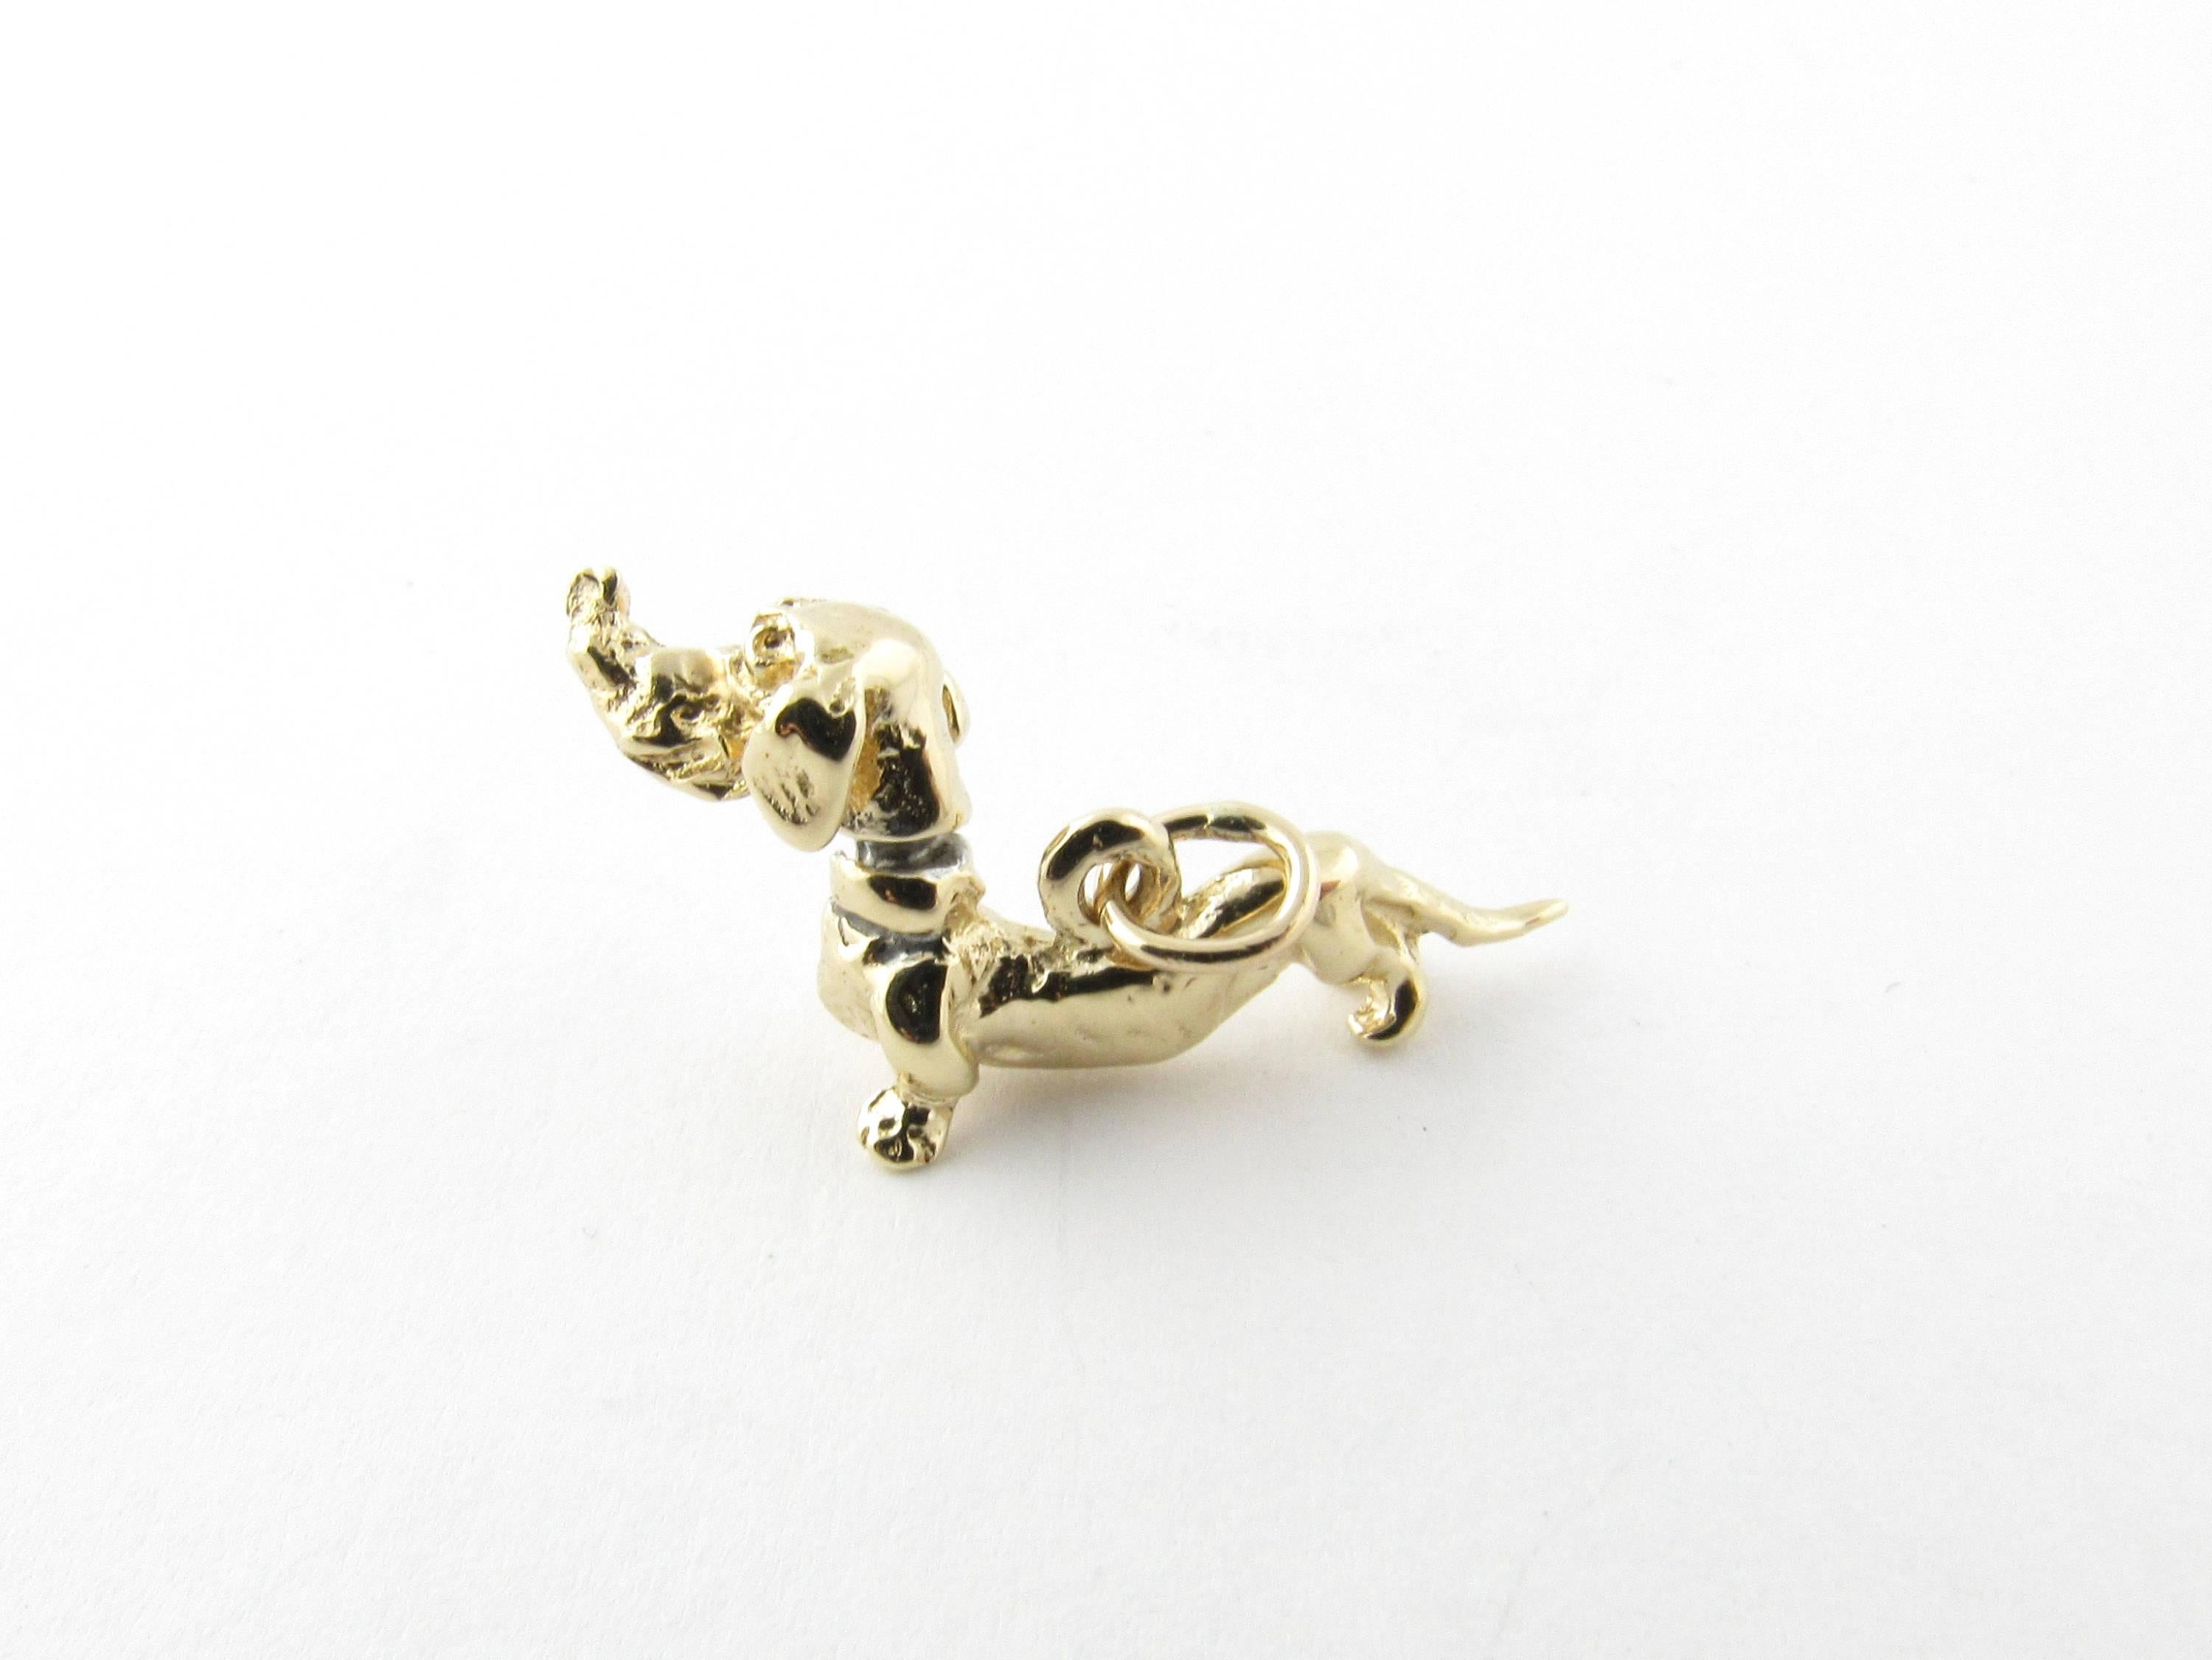 Vintage 14 Karat Yellow Gold Dachshund Charm-

This adorable 3D charm captures the adorable dachshund's personality in beautifully detailed 14K yellow gold.

Size: 11 mm x 23 mm

Weight: 1.8 dwt. / 2.9 gr.

Hallmark: Acid tested for 14K gold.

Very